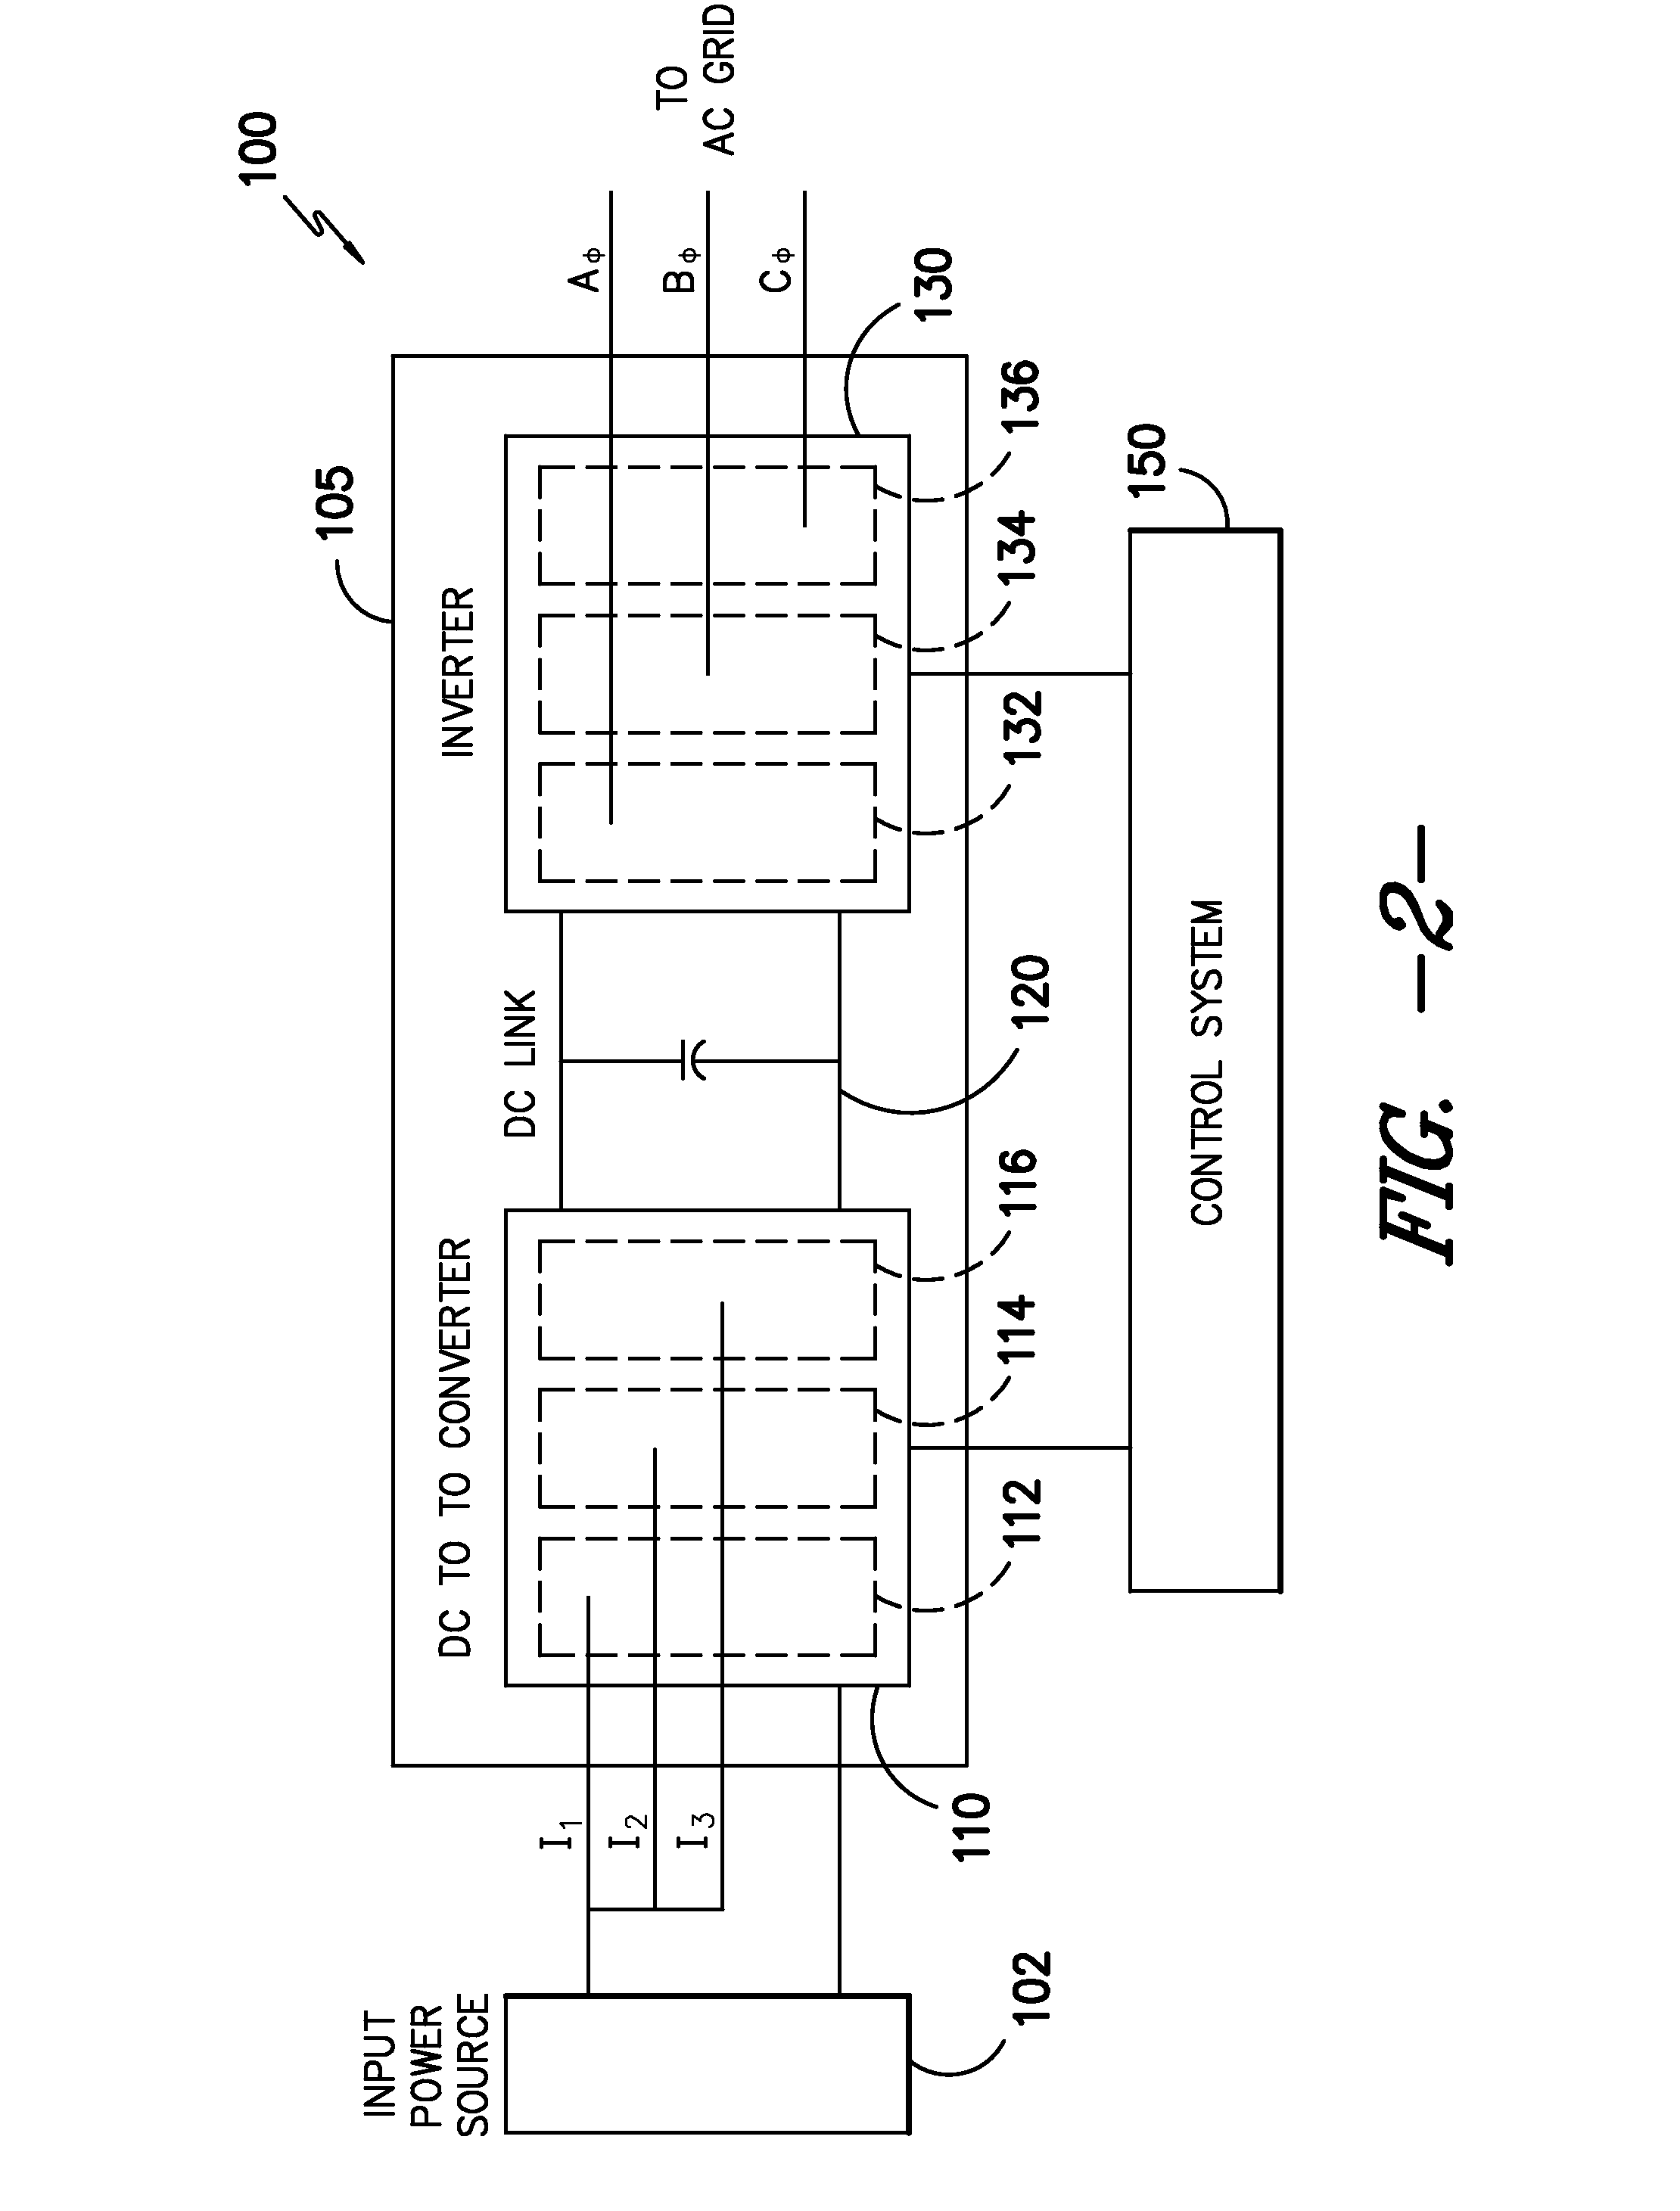 System and method for improving low-load efficiency of high power converters